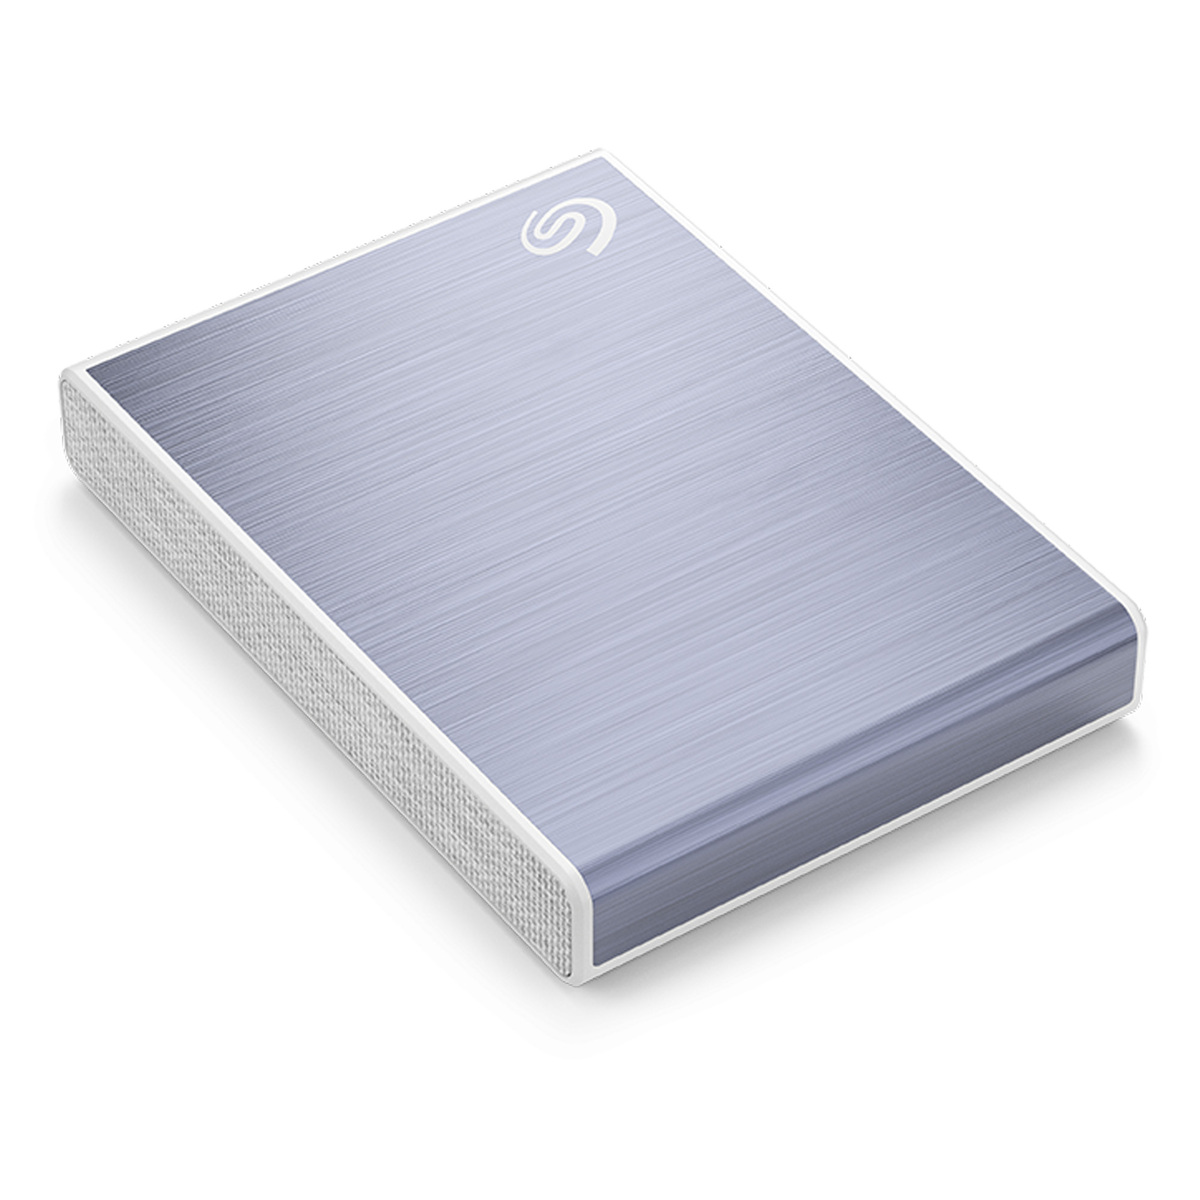 Seagate One Touch Portable External SSD, 1 TB Storage, Blue, STKG1000402